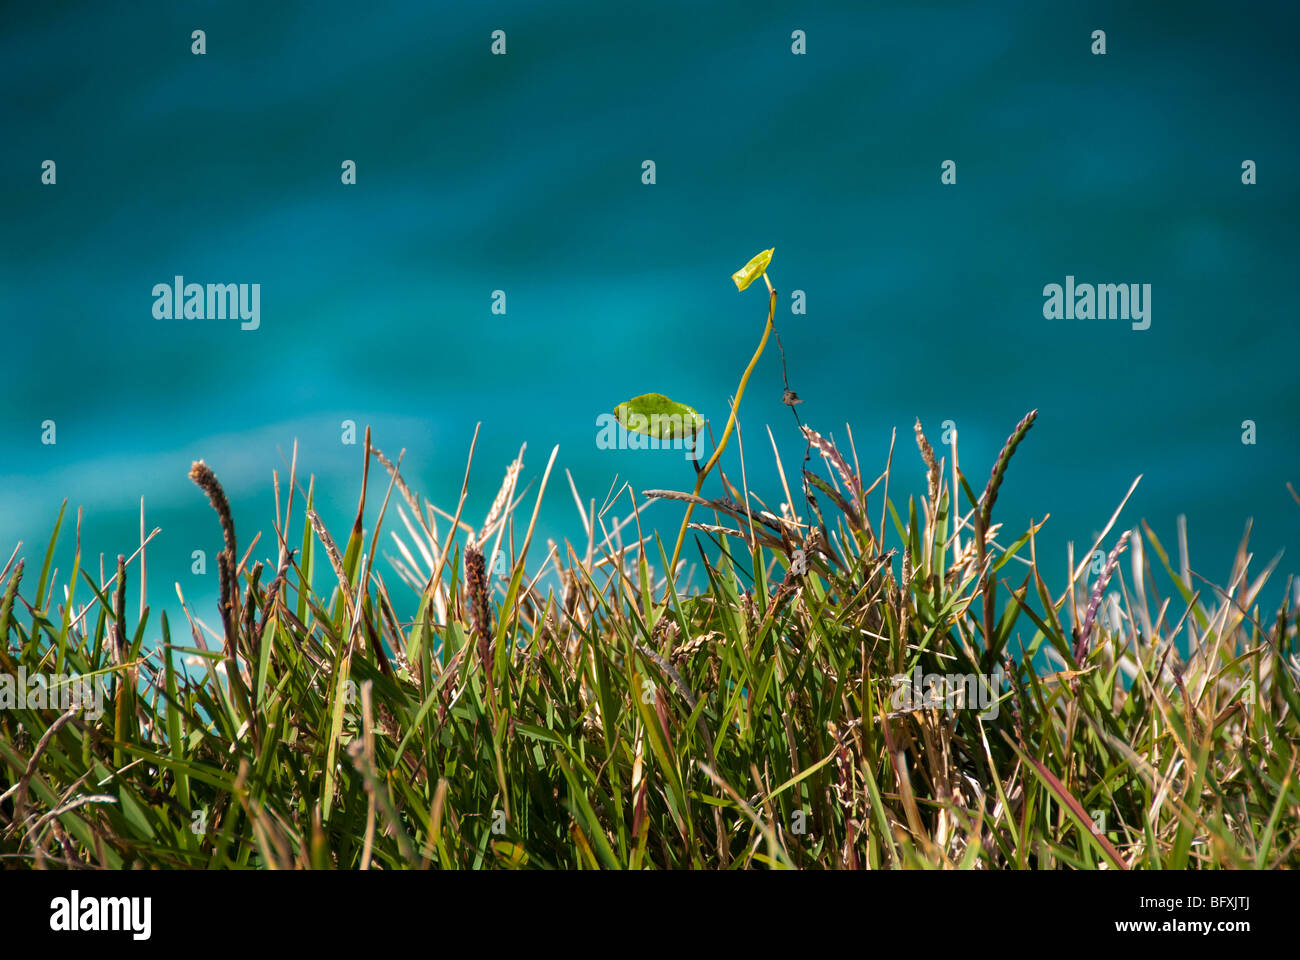 A particular of the Cliff Grass around Byron Bay Coast,nature, Stock Photo